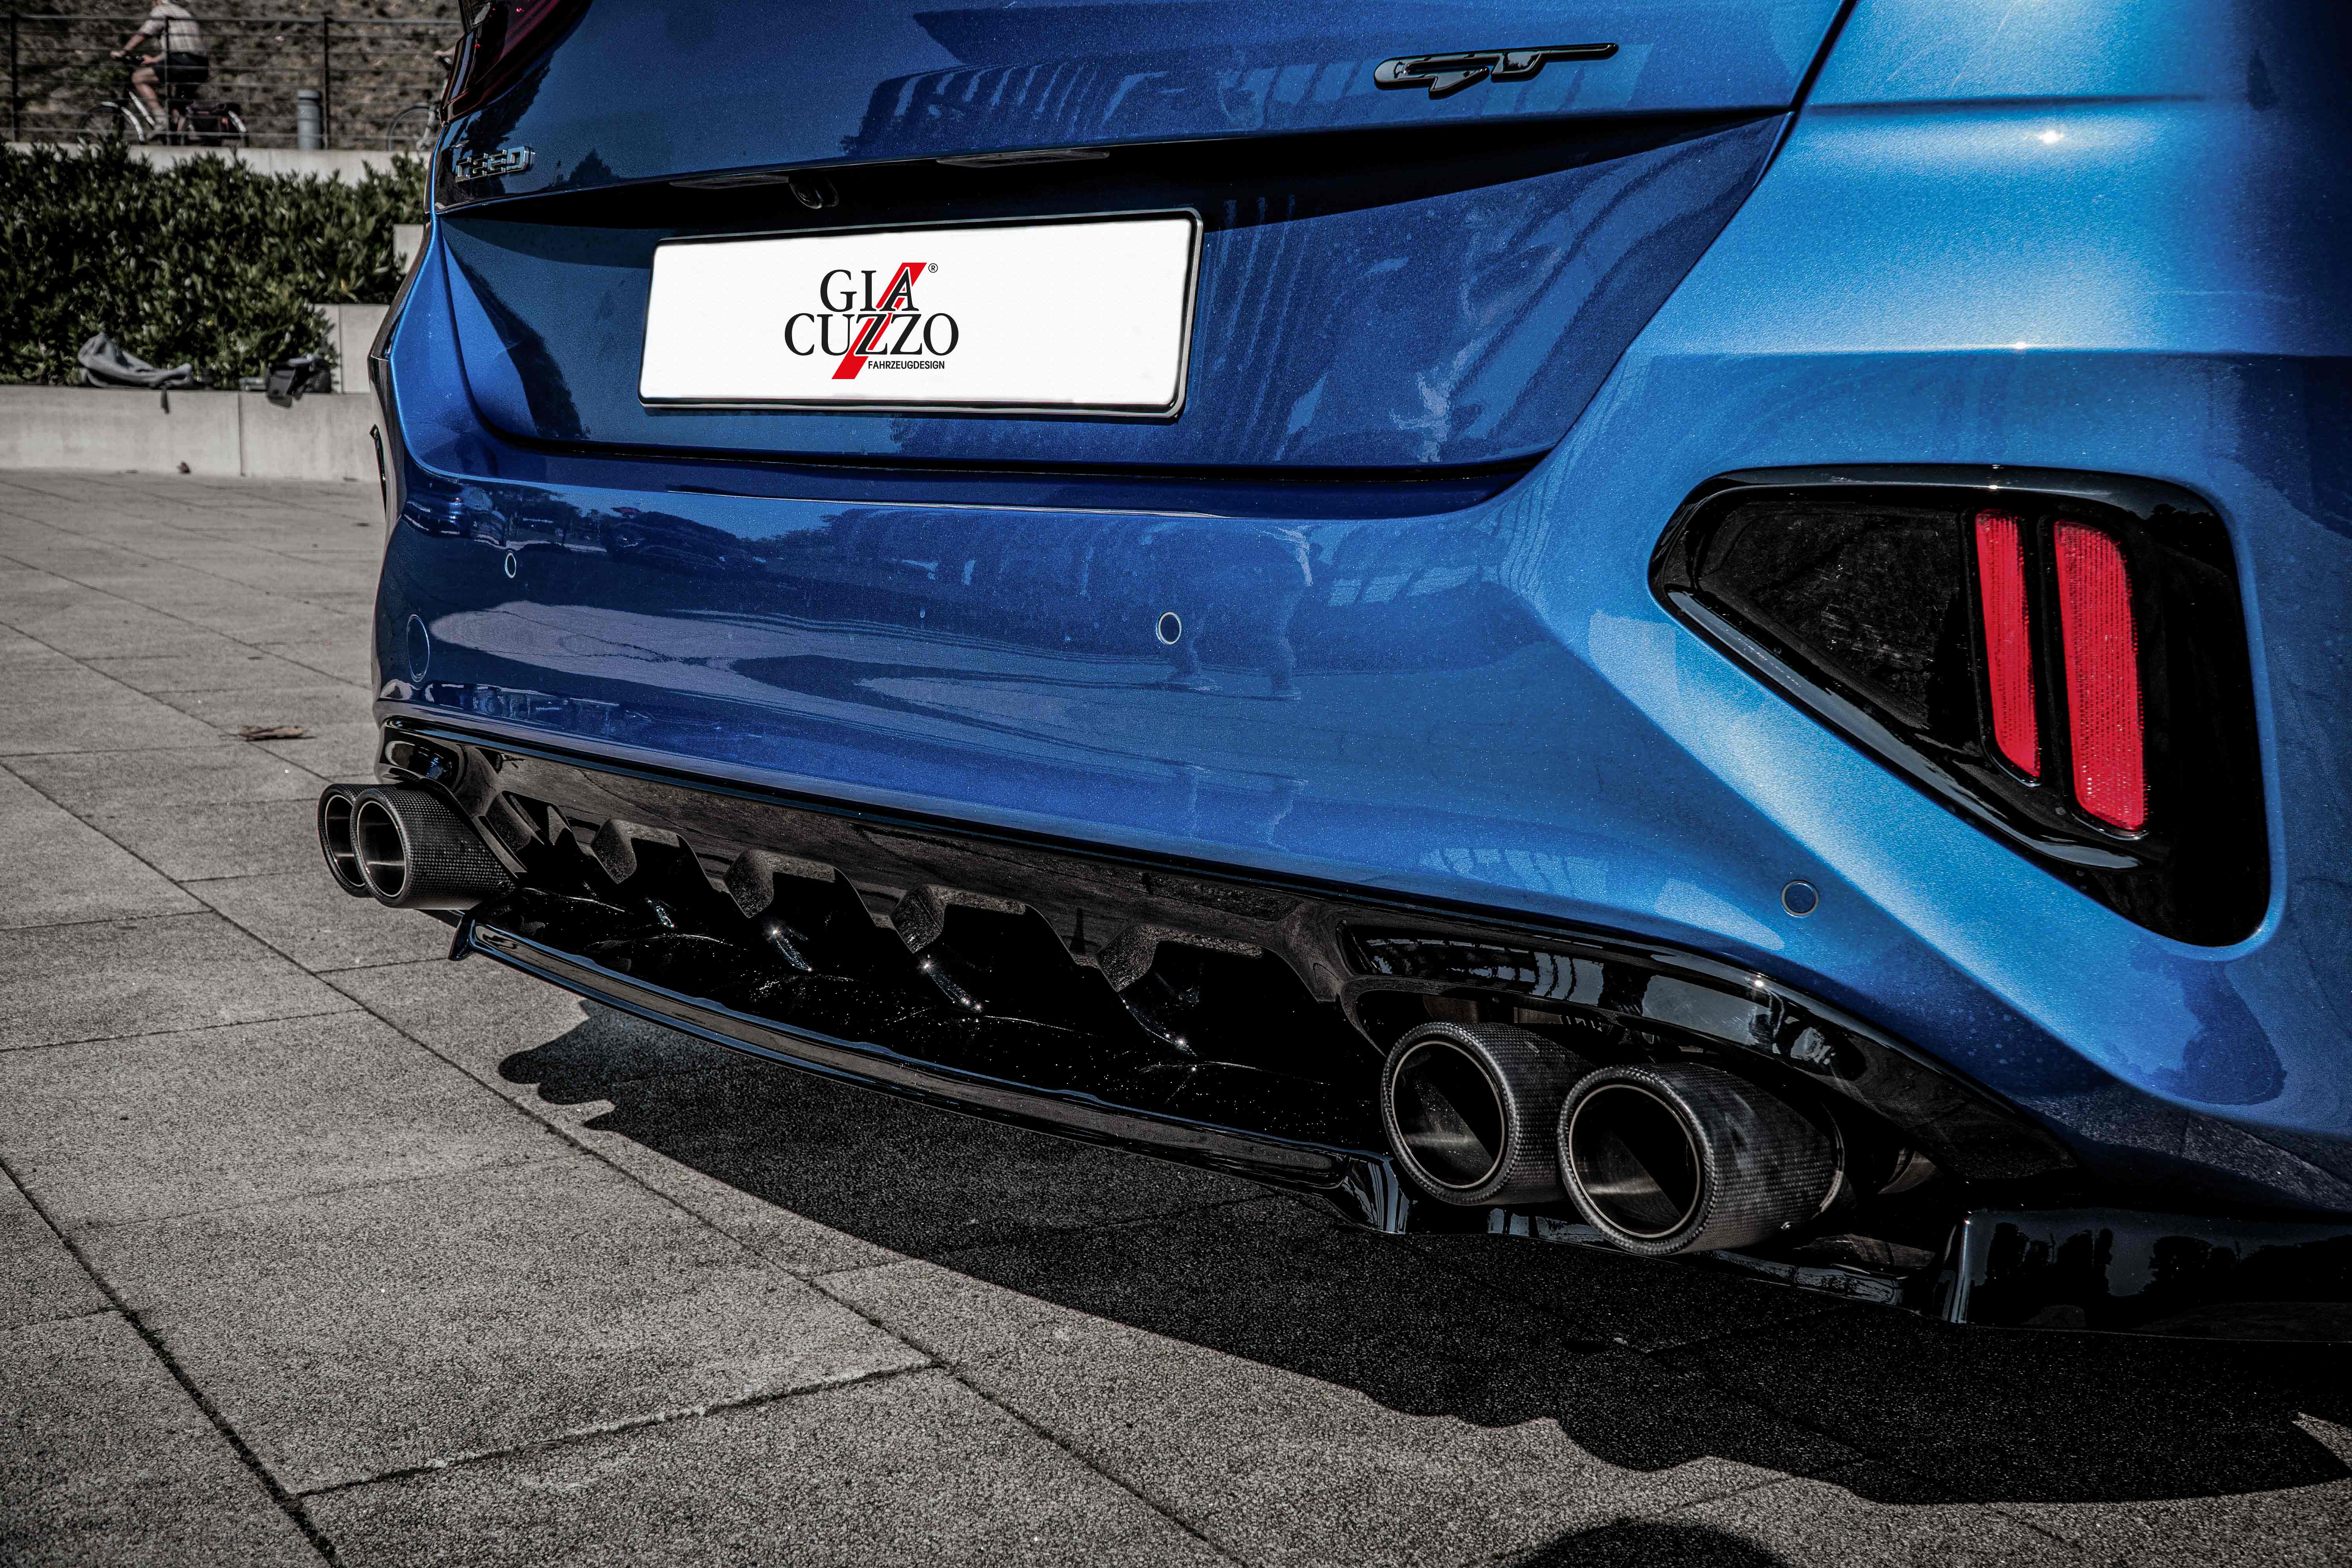 Giacuzzo rear diffuser fits for Kia Pro Ceed GT CD